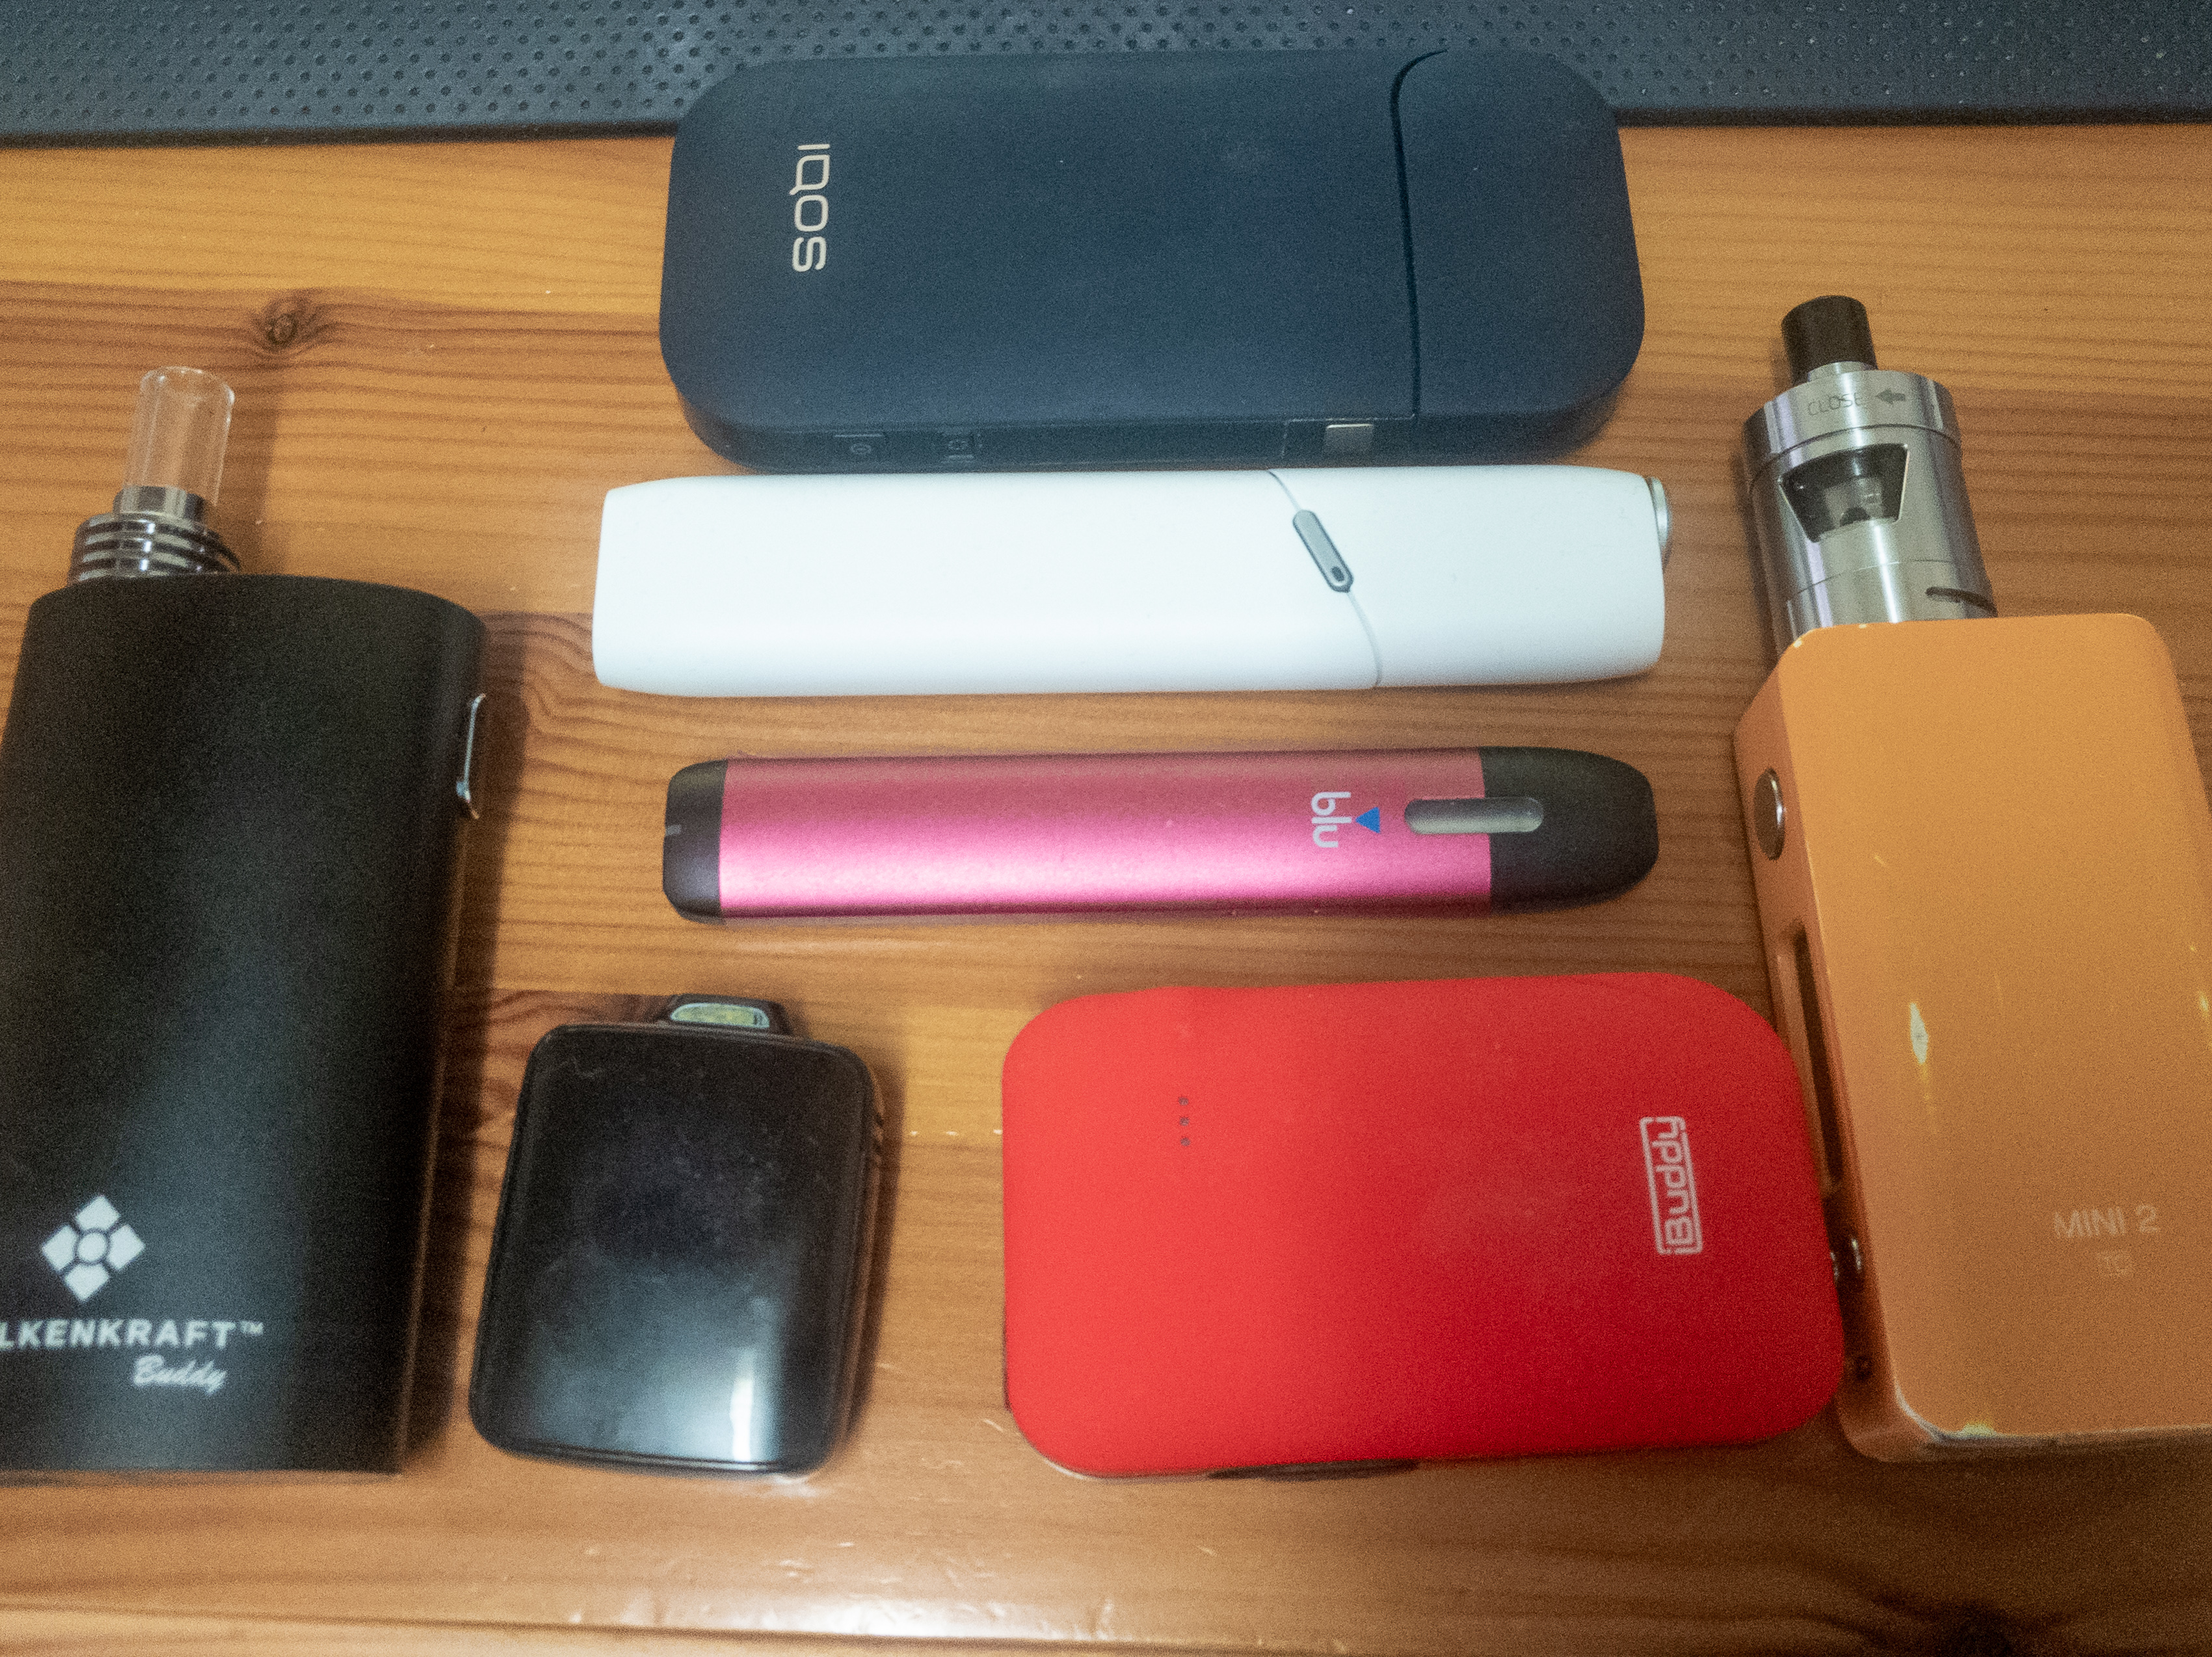 A selection of my current devices